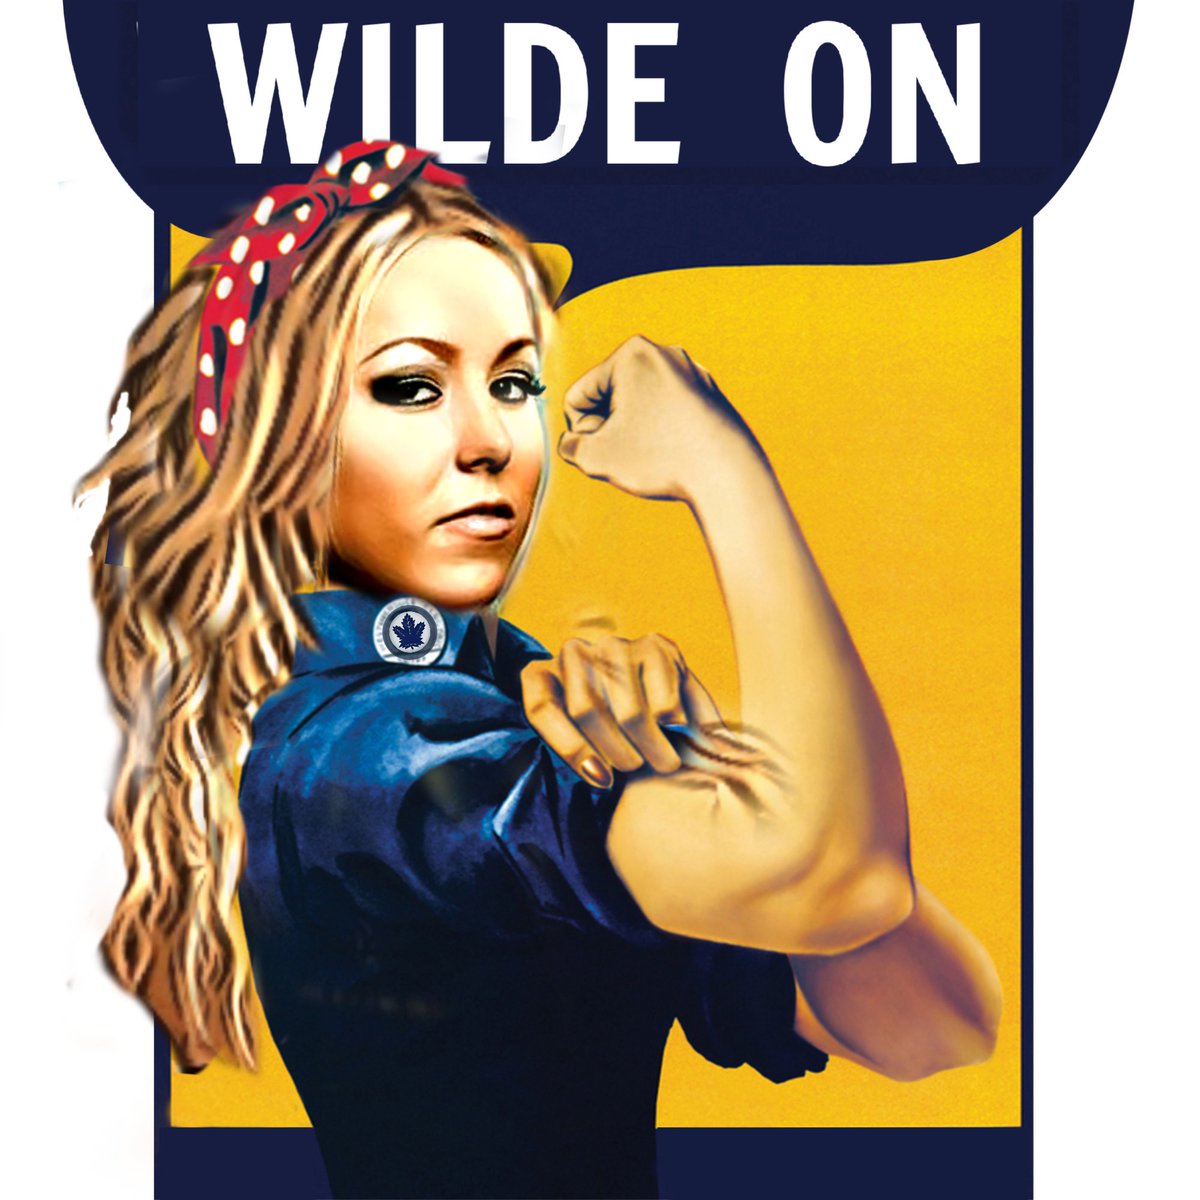 6/24/2020

Taylor Wilde launched her podcast, Wilde On.

open.spotify.com/show/24JVgZa6Q…

#TNA #ImpactWrestling #TotalNonstopAction #CrossTheLine #WrestlingMatters #TNAWrestling #TaylorWilde #WildOn #WomensChampion #WomensWrestling #WomenOfWrestling #WomensDivision #Herstory #WWE